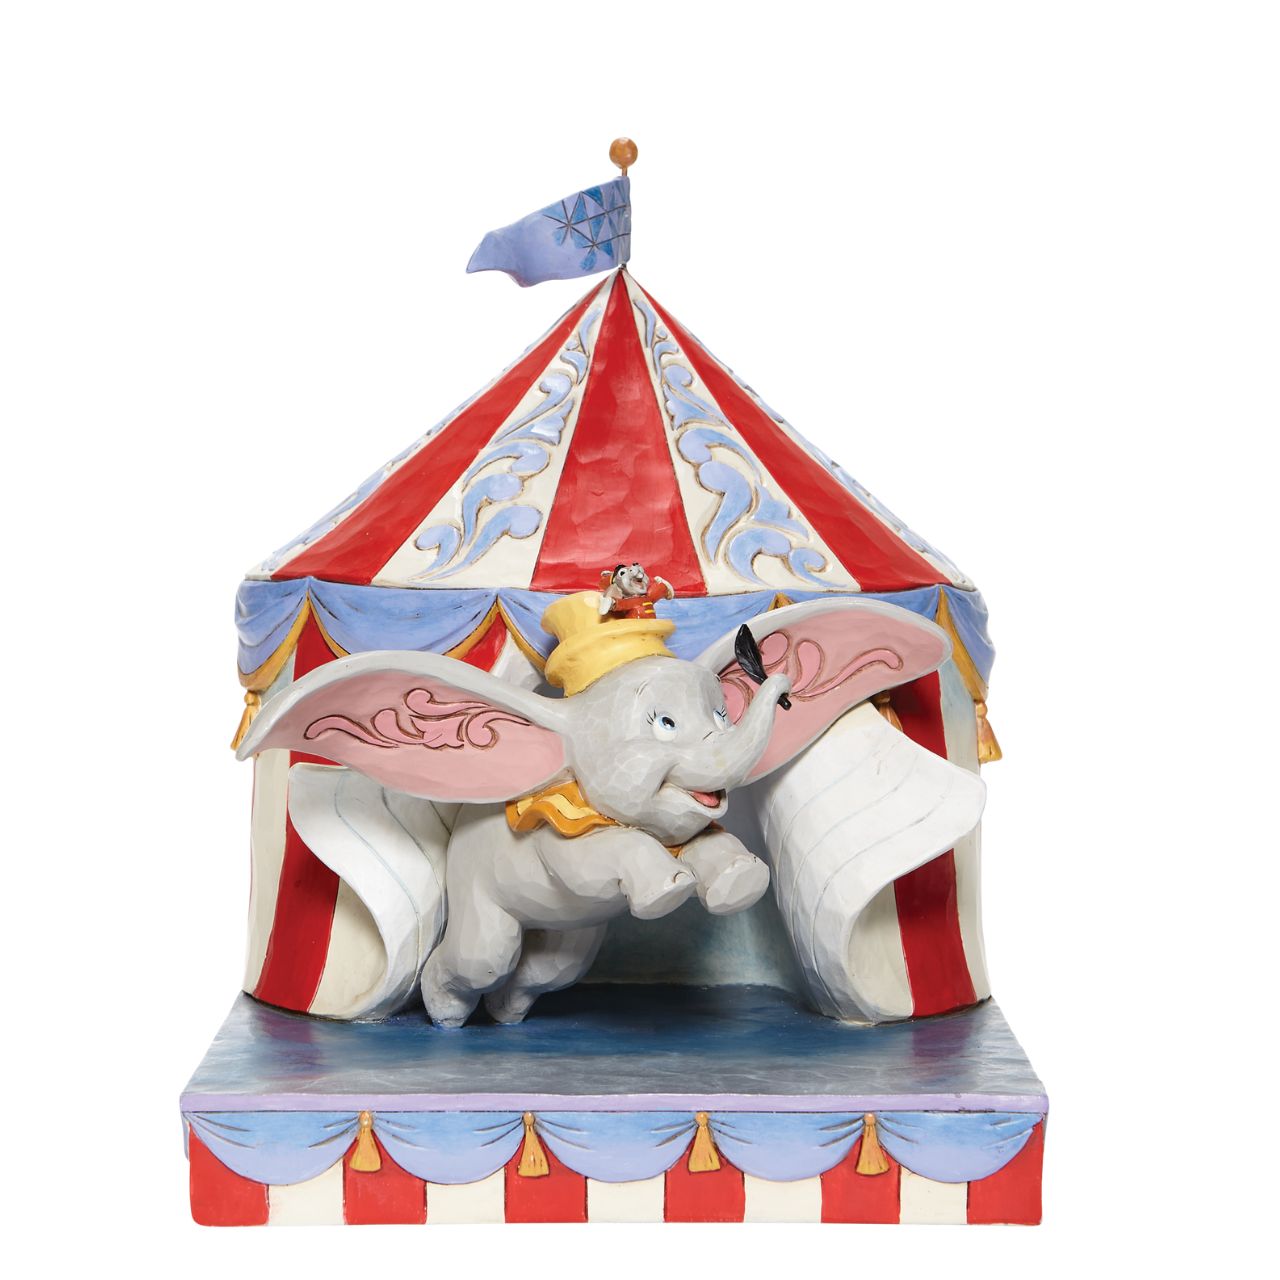 Jim Shore Over the Big Top - Dumbo Circus out of Tent Figurine  With Timothy's encouragement, guidance, and the willingness from a feather, Dumbo takes his favourite friend on an adventurous flight. This Disney piece by Jim Shore is intricately hand-painted and detailed with folk art motifs and is great for any Dumbo fan.